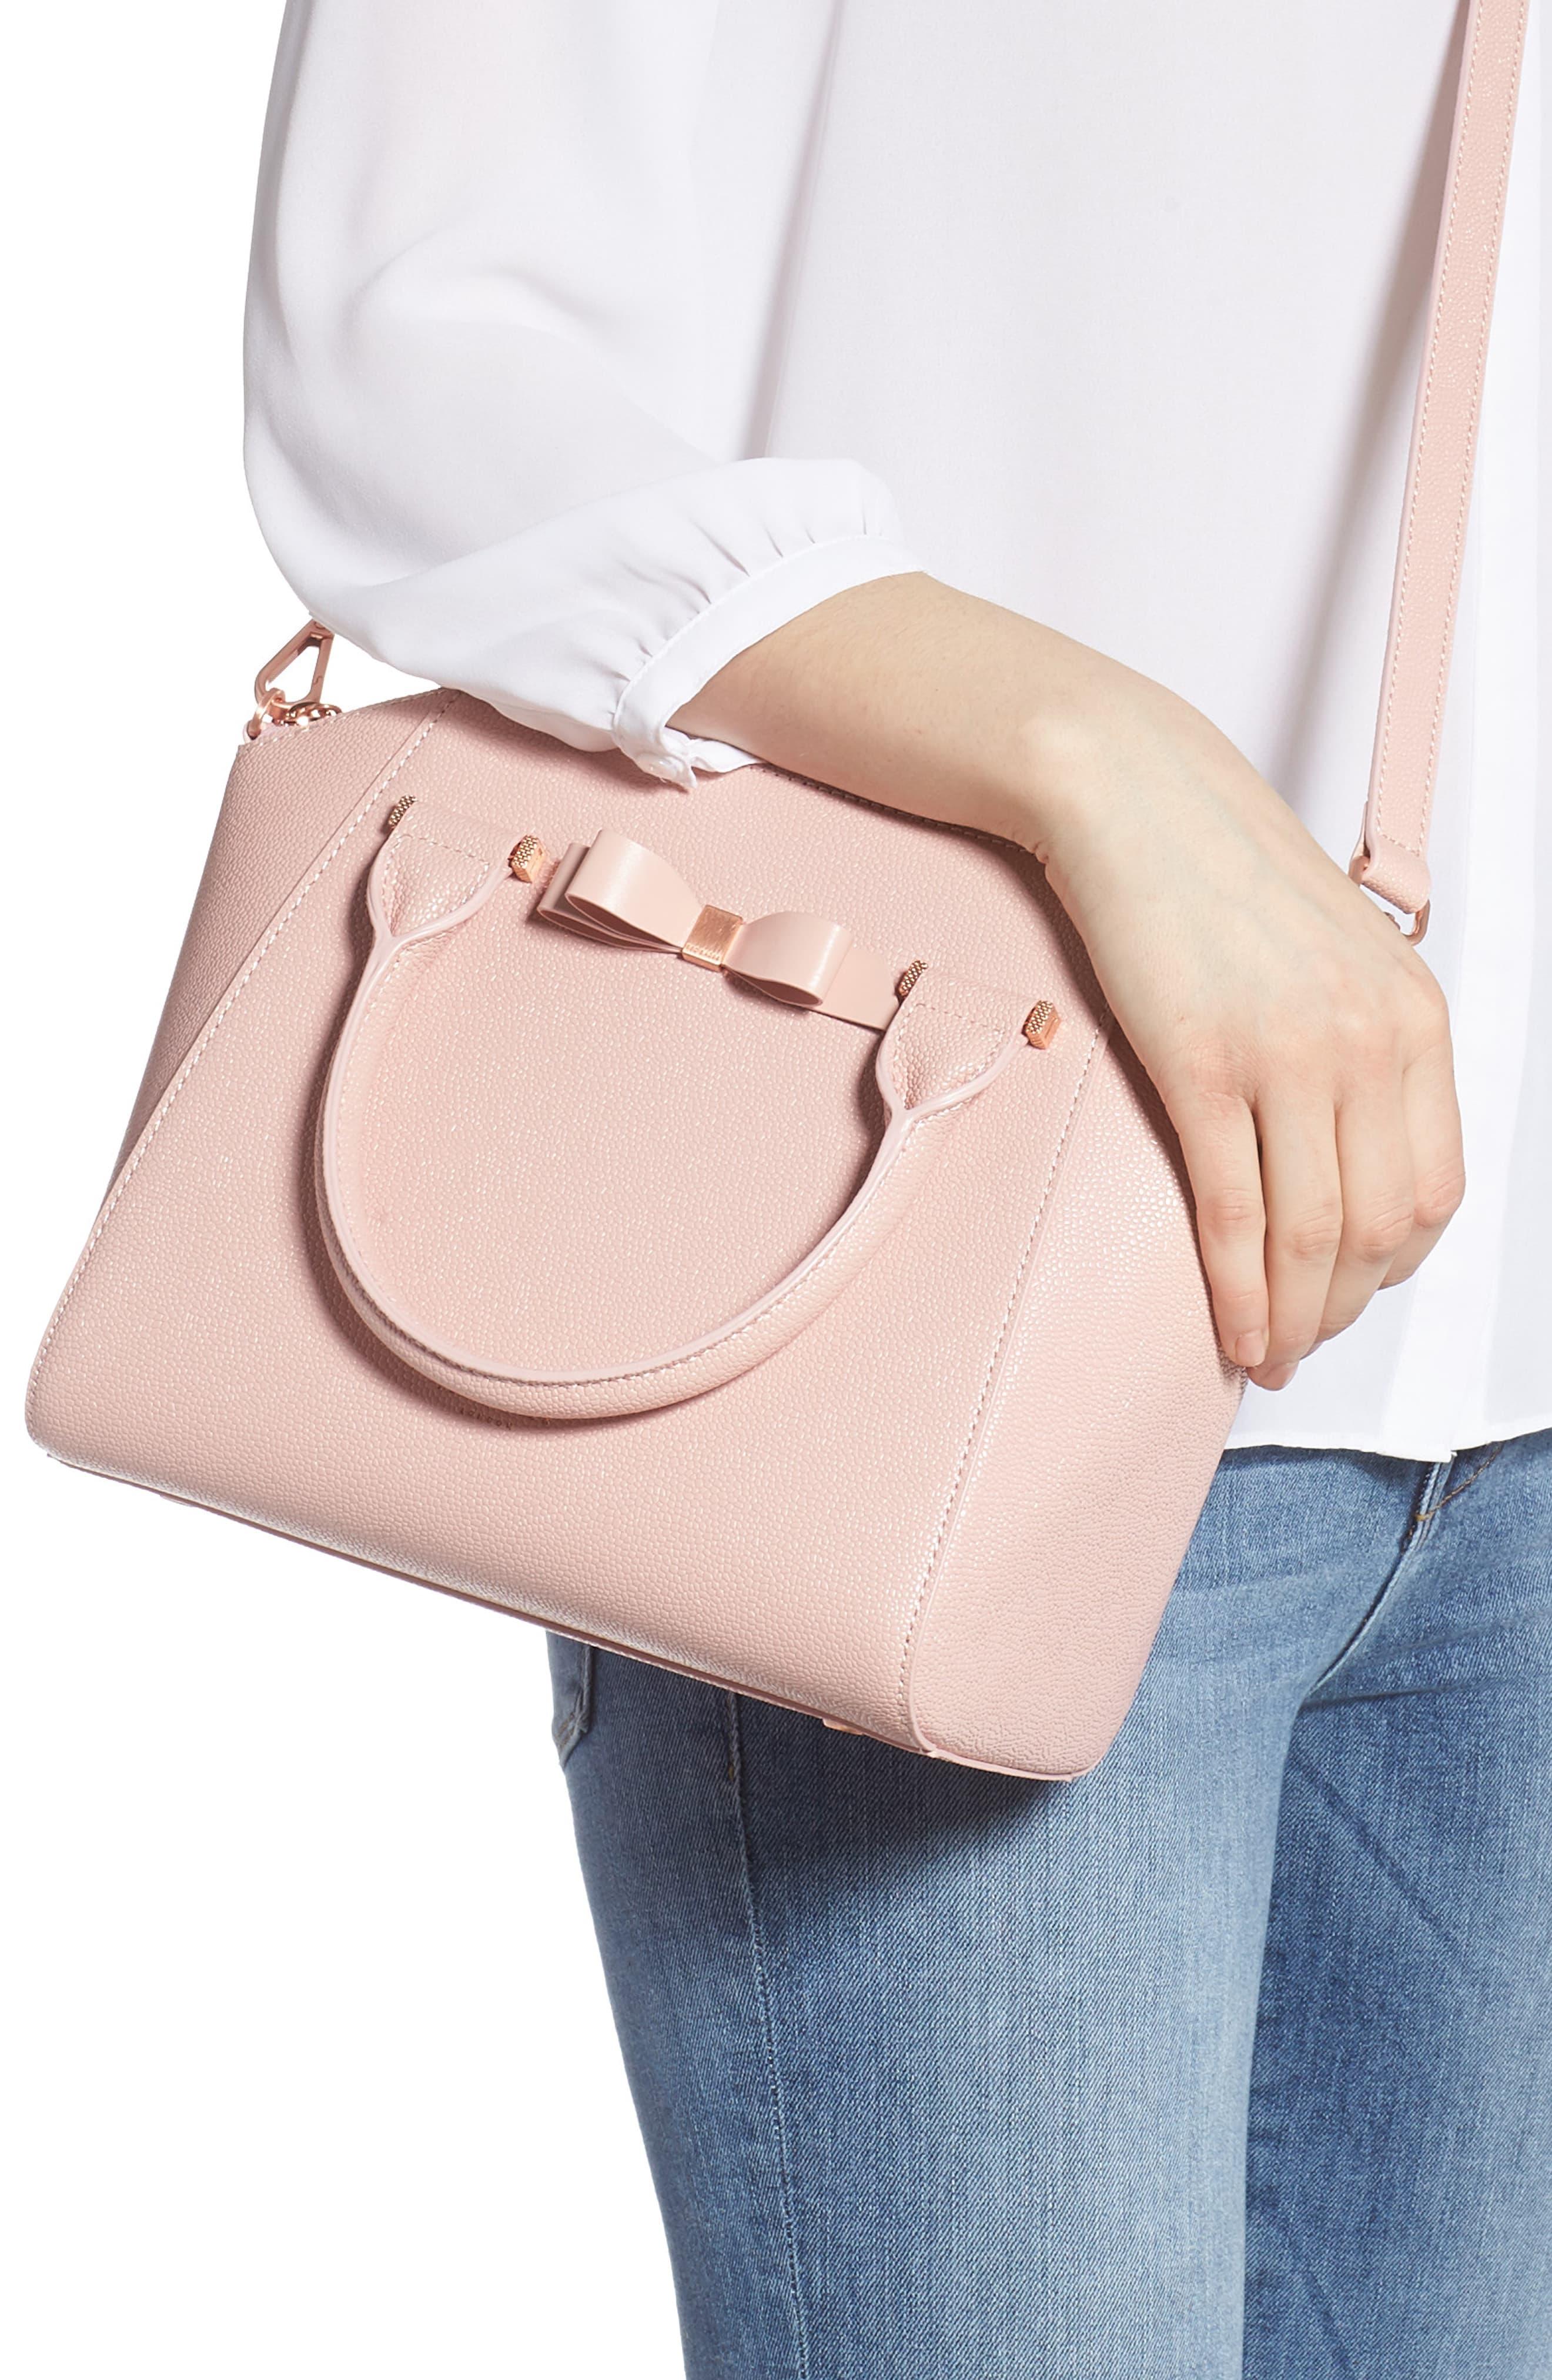 Ted Baker Janne Bow Leather Tote in Light Pink (Pink) - Lyst